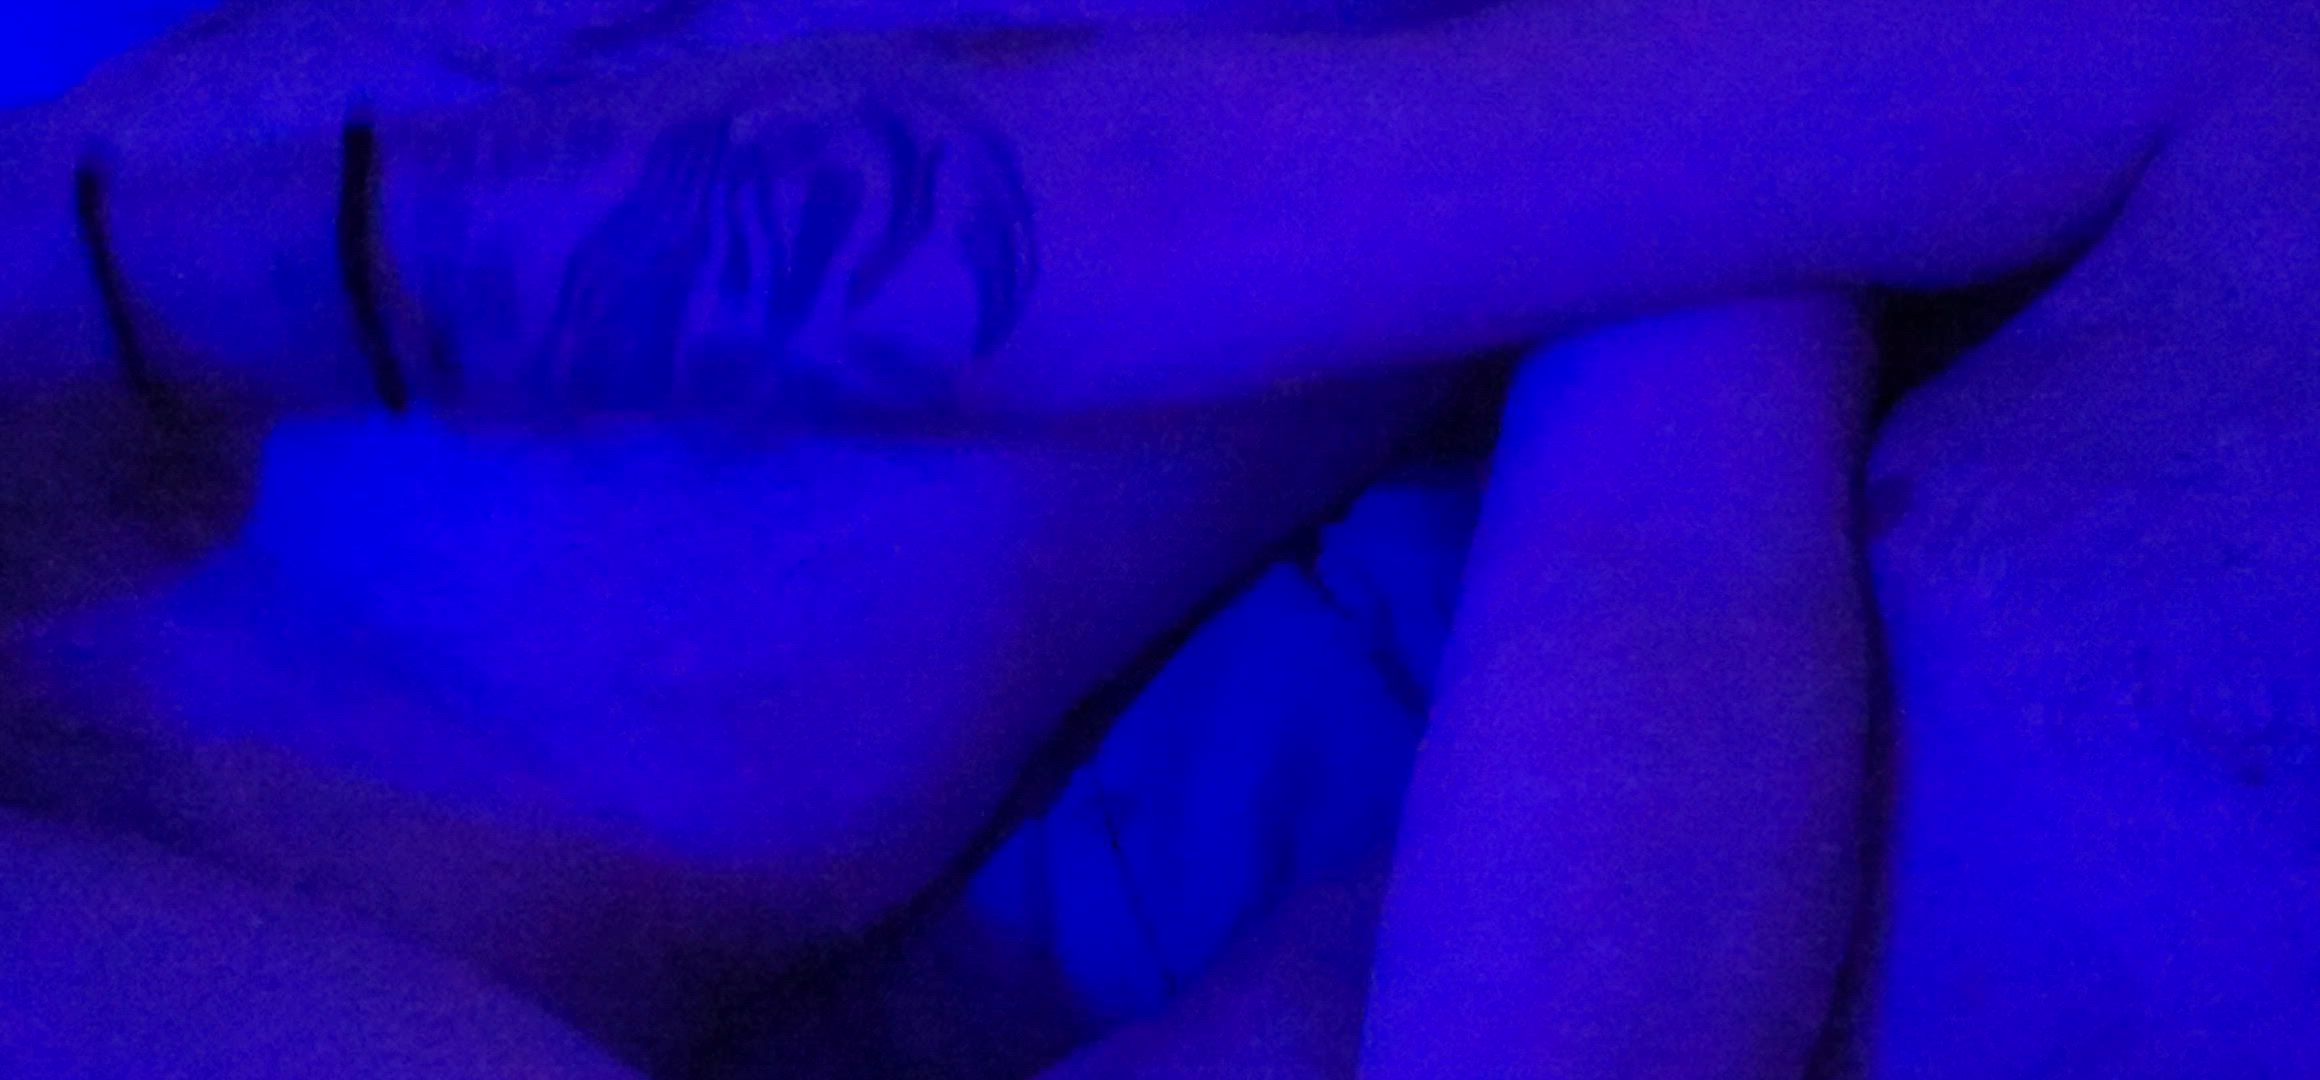 Amateur porn video with onlyfans model robbxwill666 <strong>@robbxwill</strong>